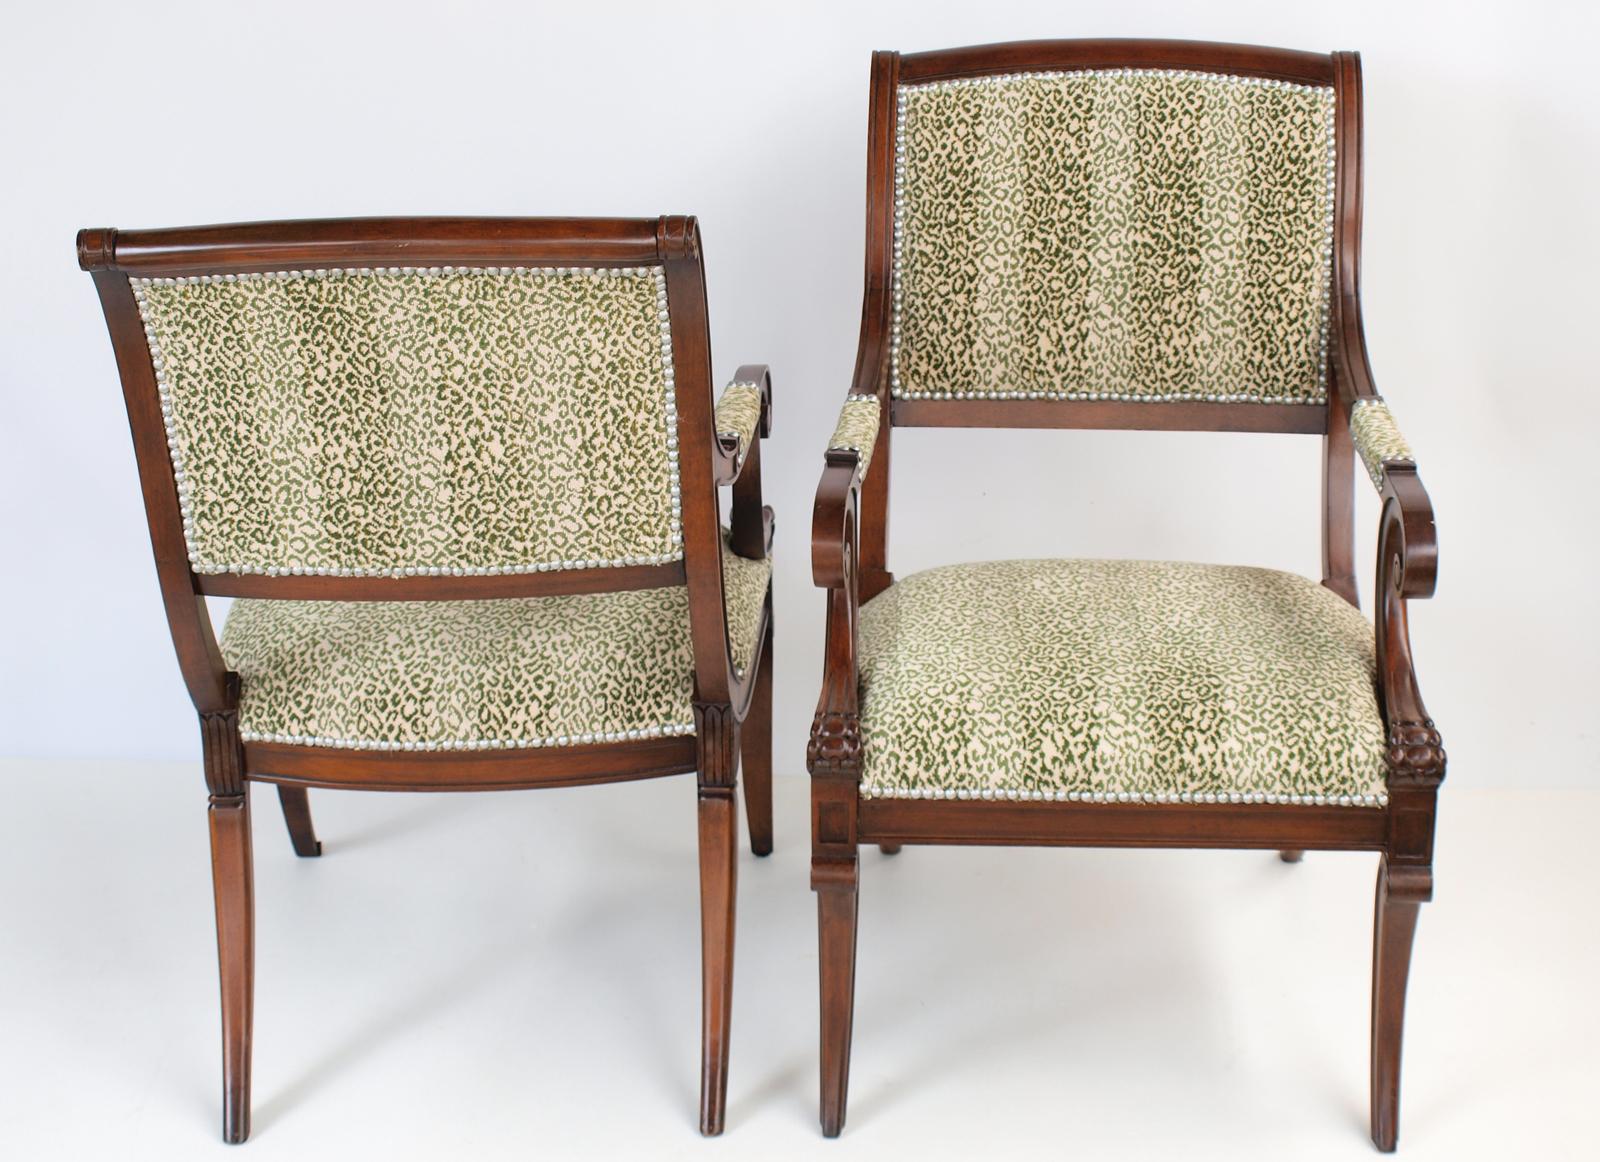 Upholstery Pair of Vintage Mahogany English Regency Style Armchairs For Sale